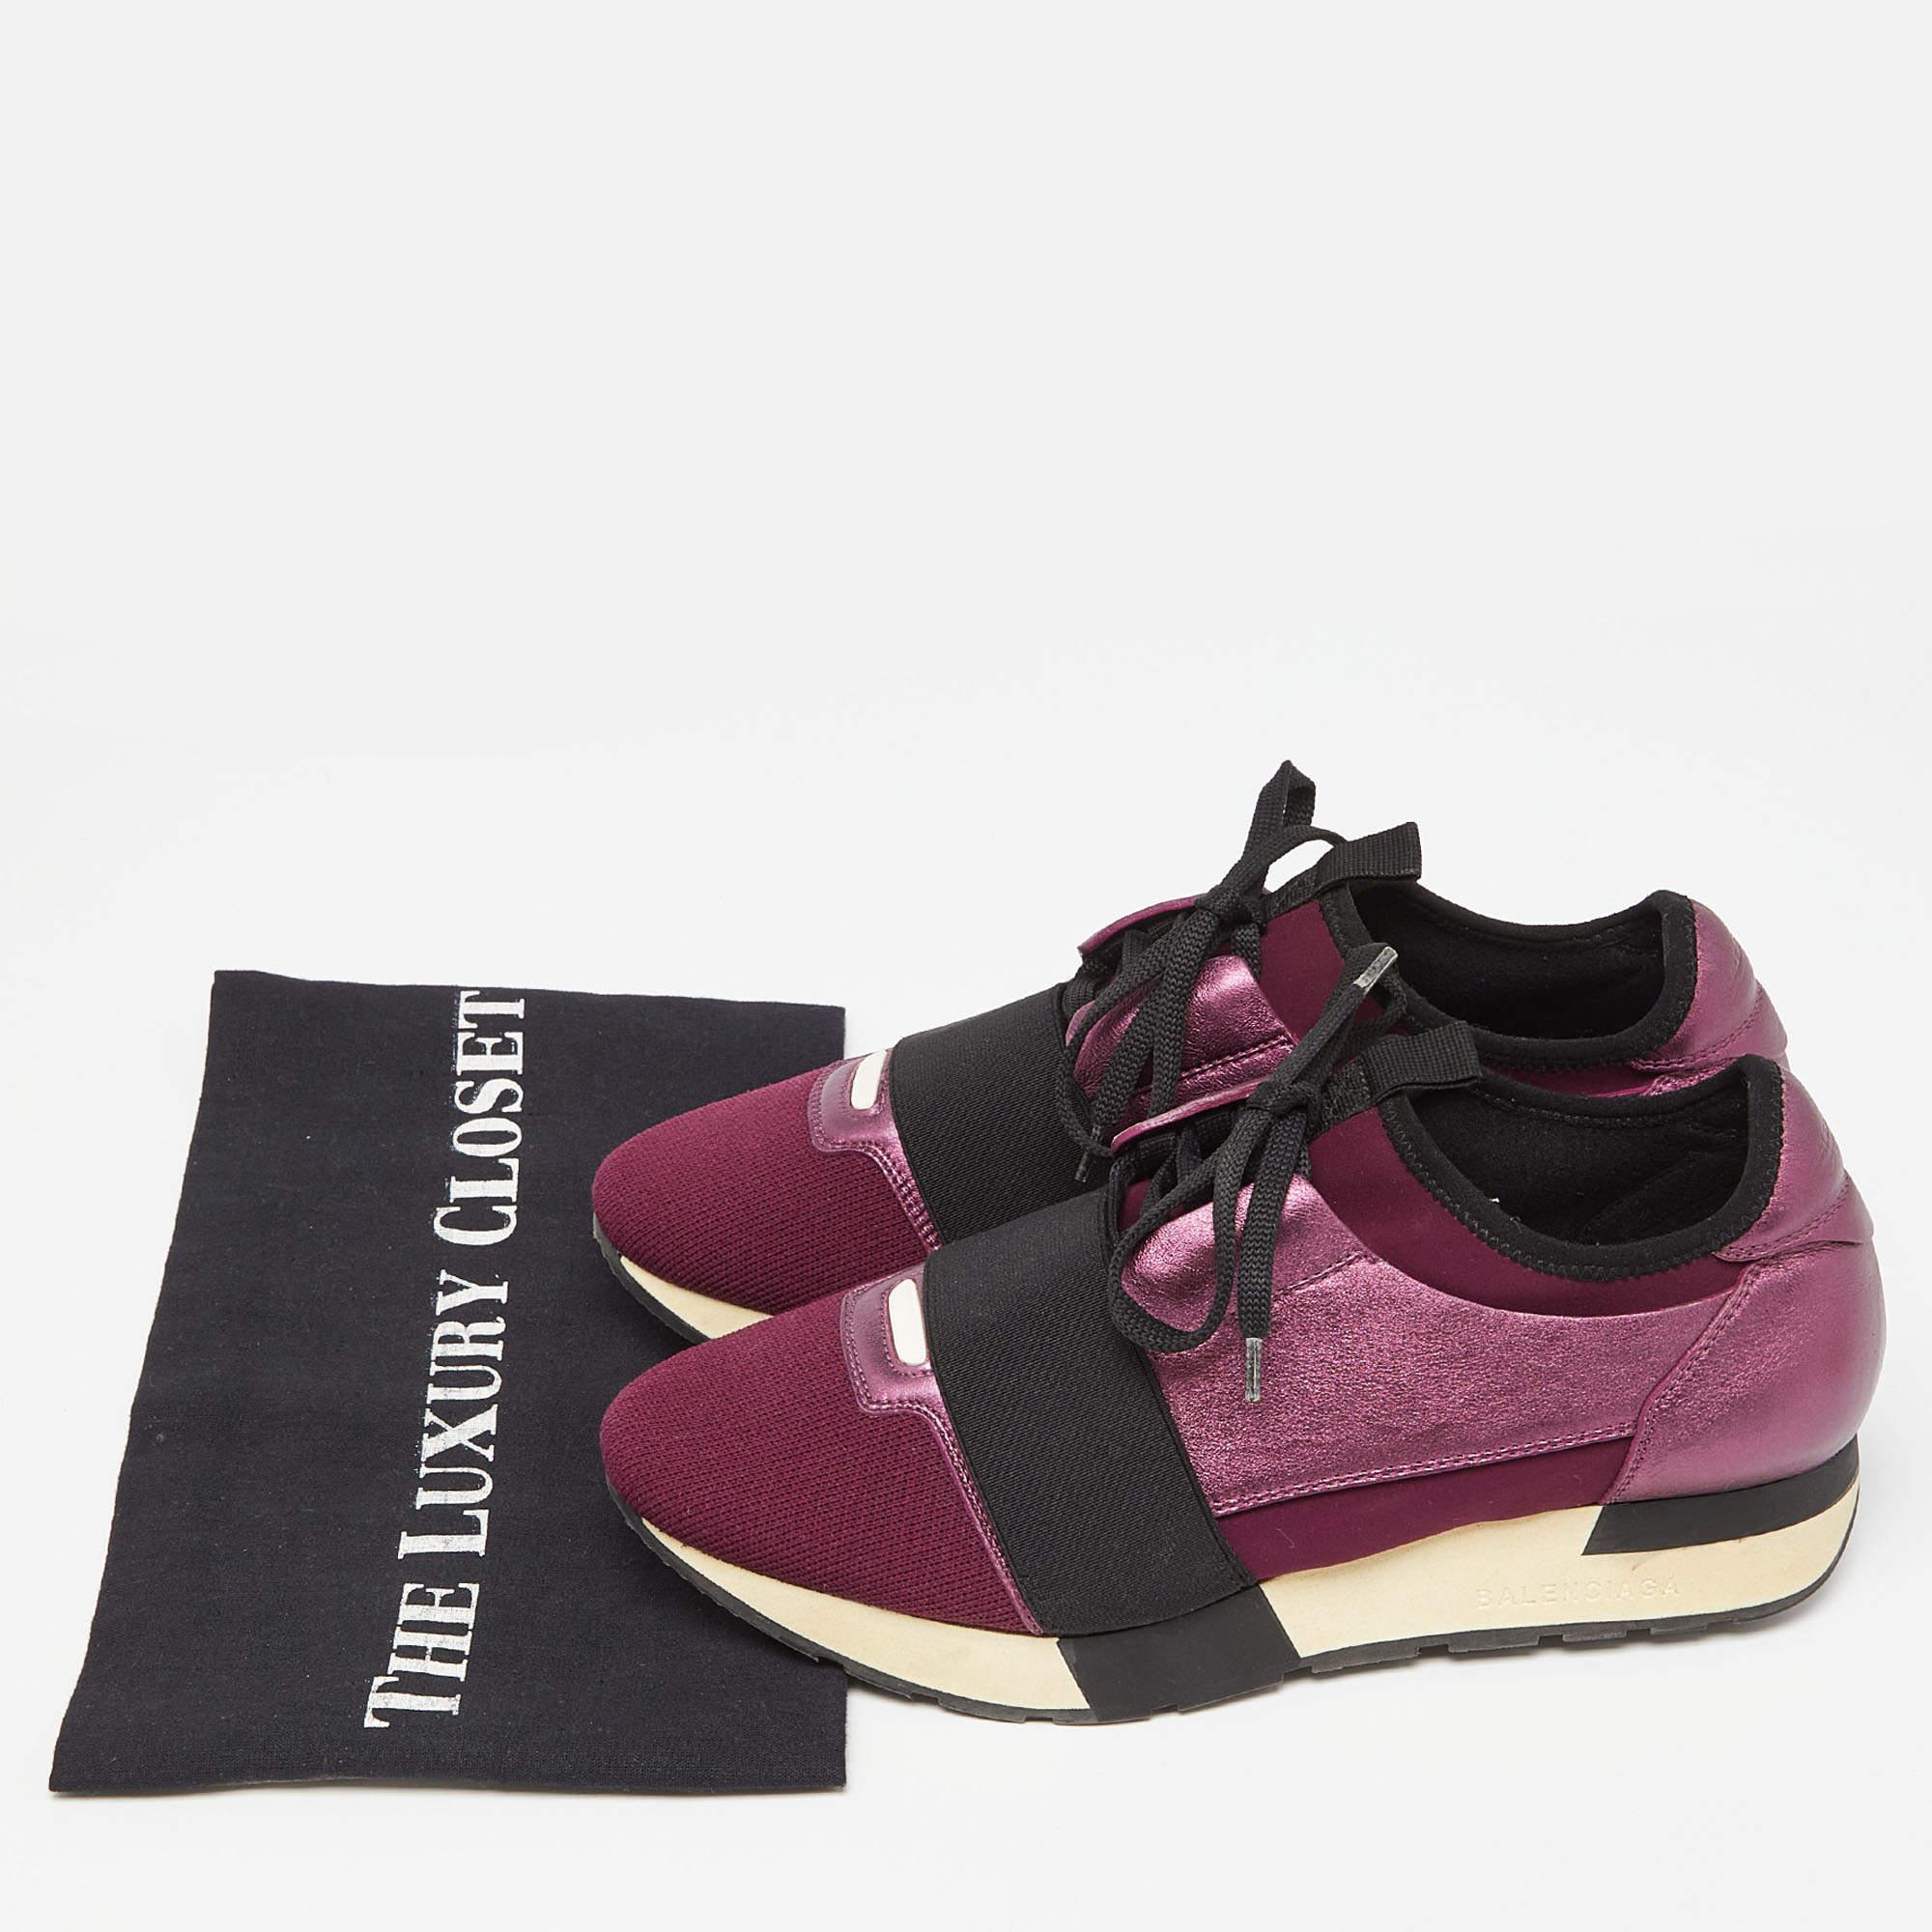 Balenciaga Purple Leather and Neoprene Race Runner Sneakers Size 38 For Sale 6